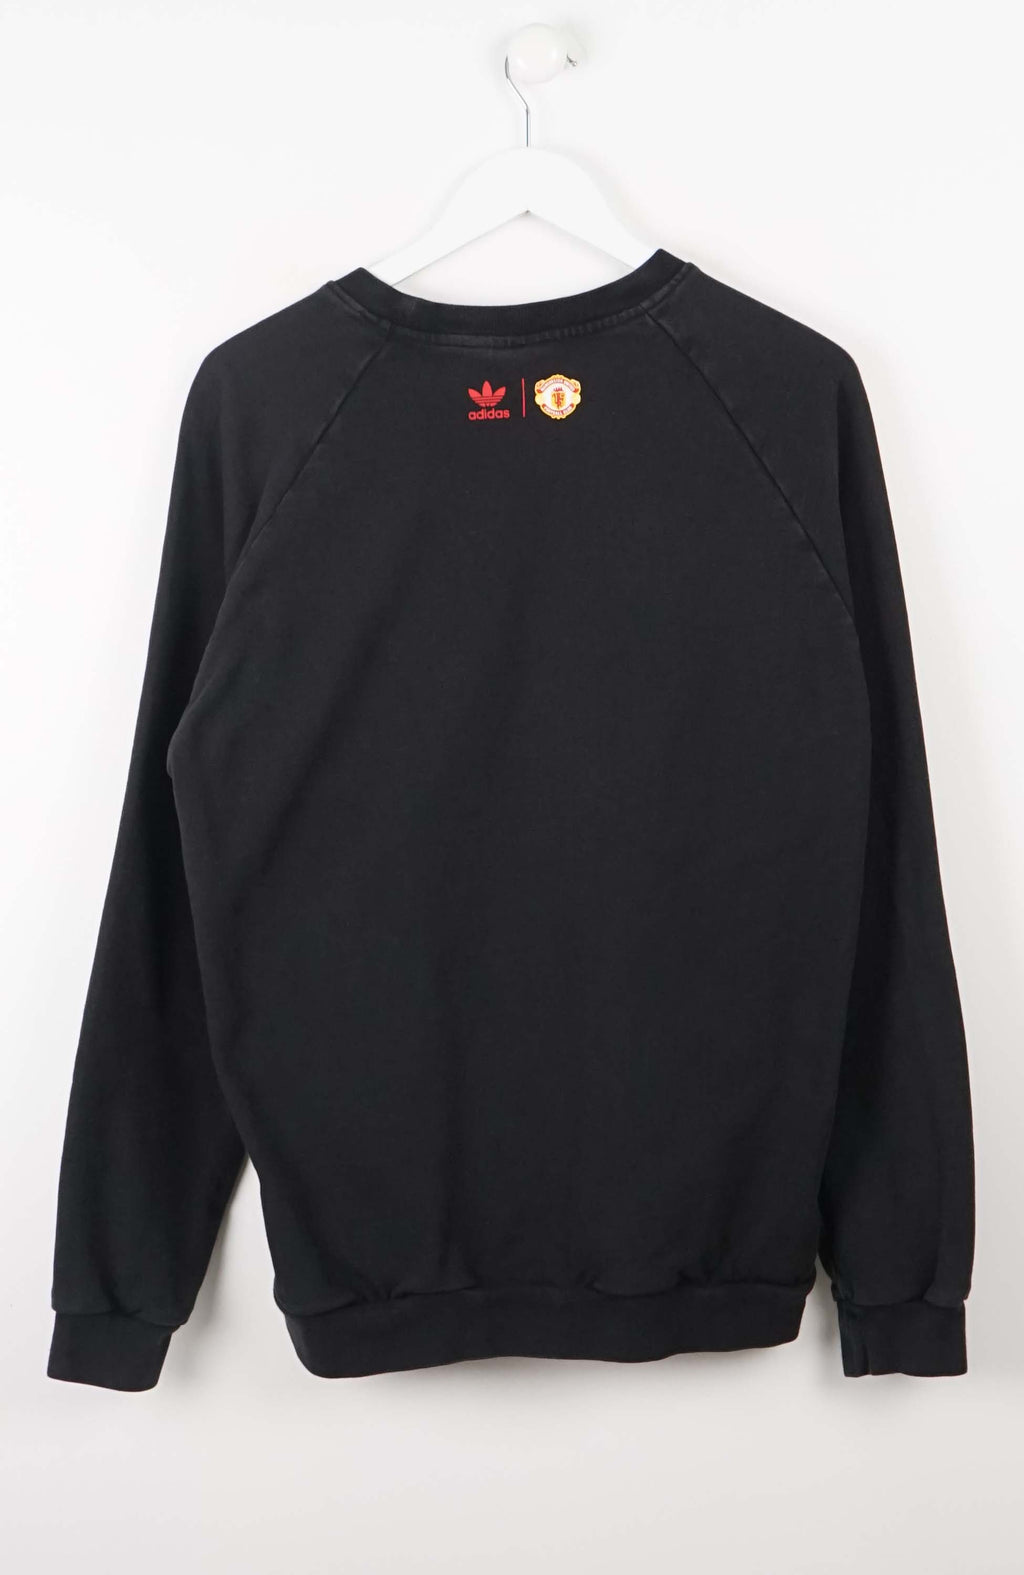 VINTAGE ADIDAS MANCHESTER UNITED SWEATER (L) 